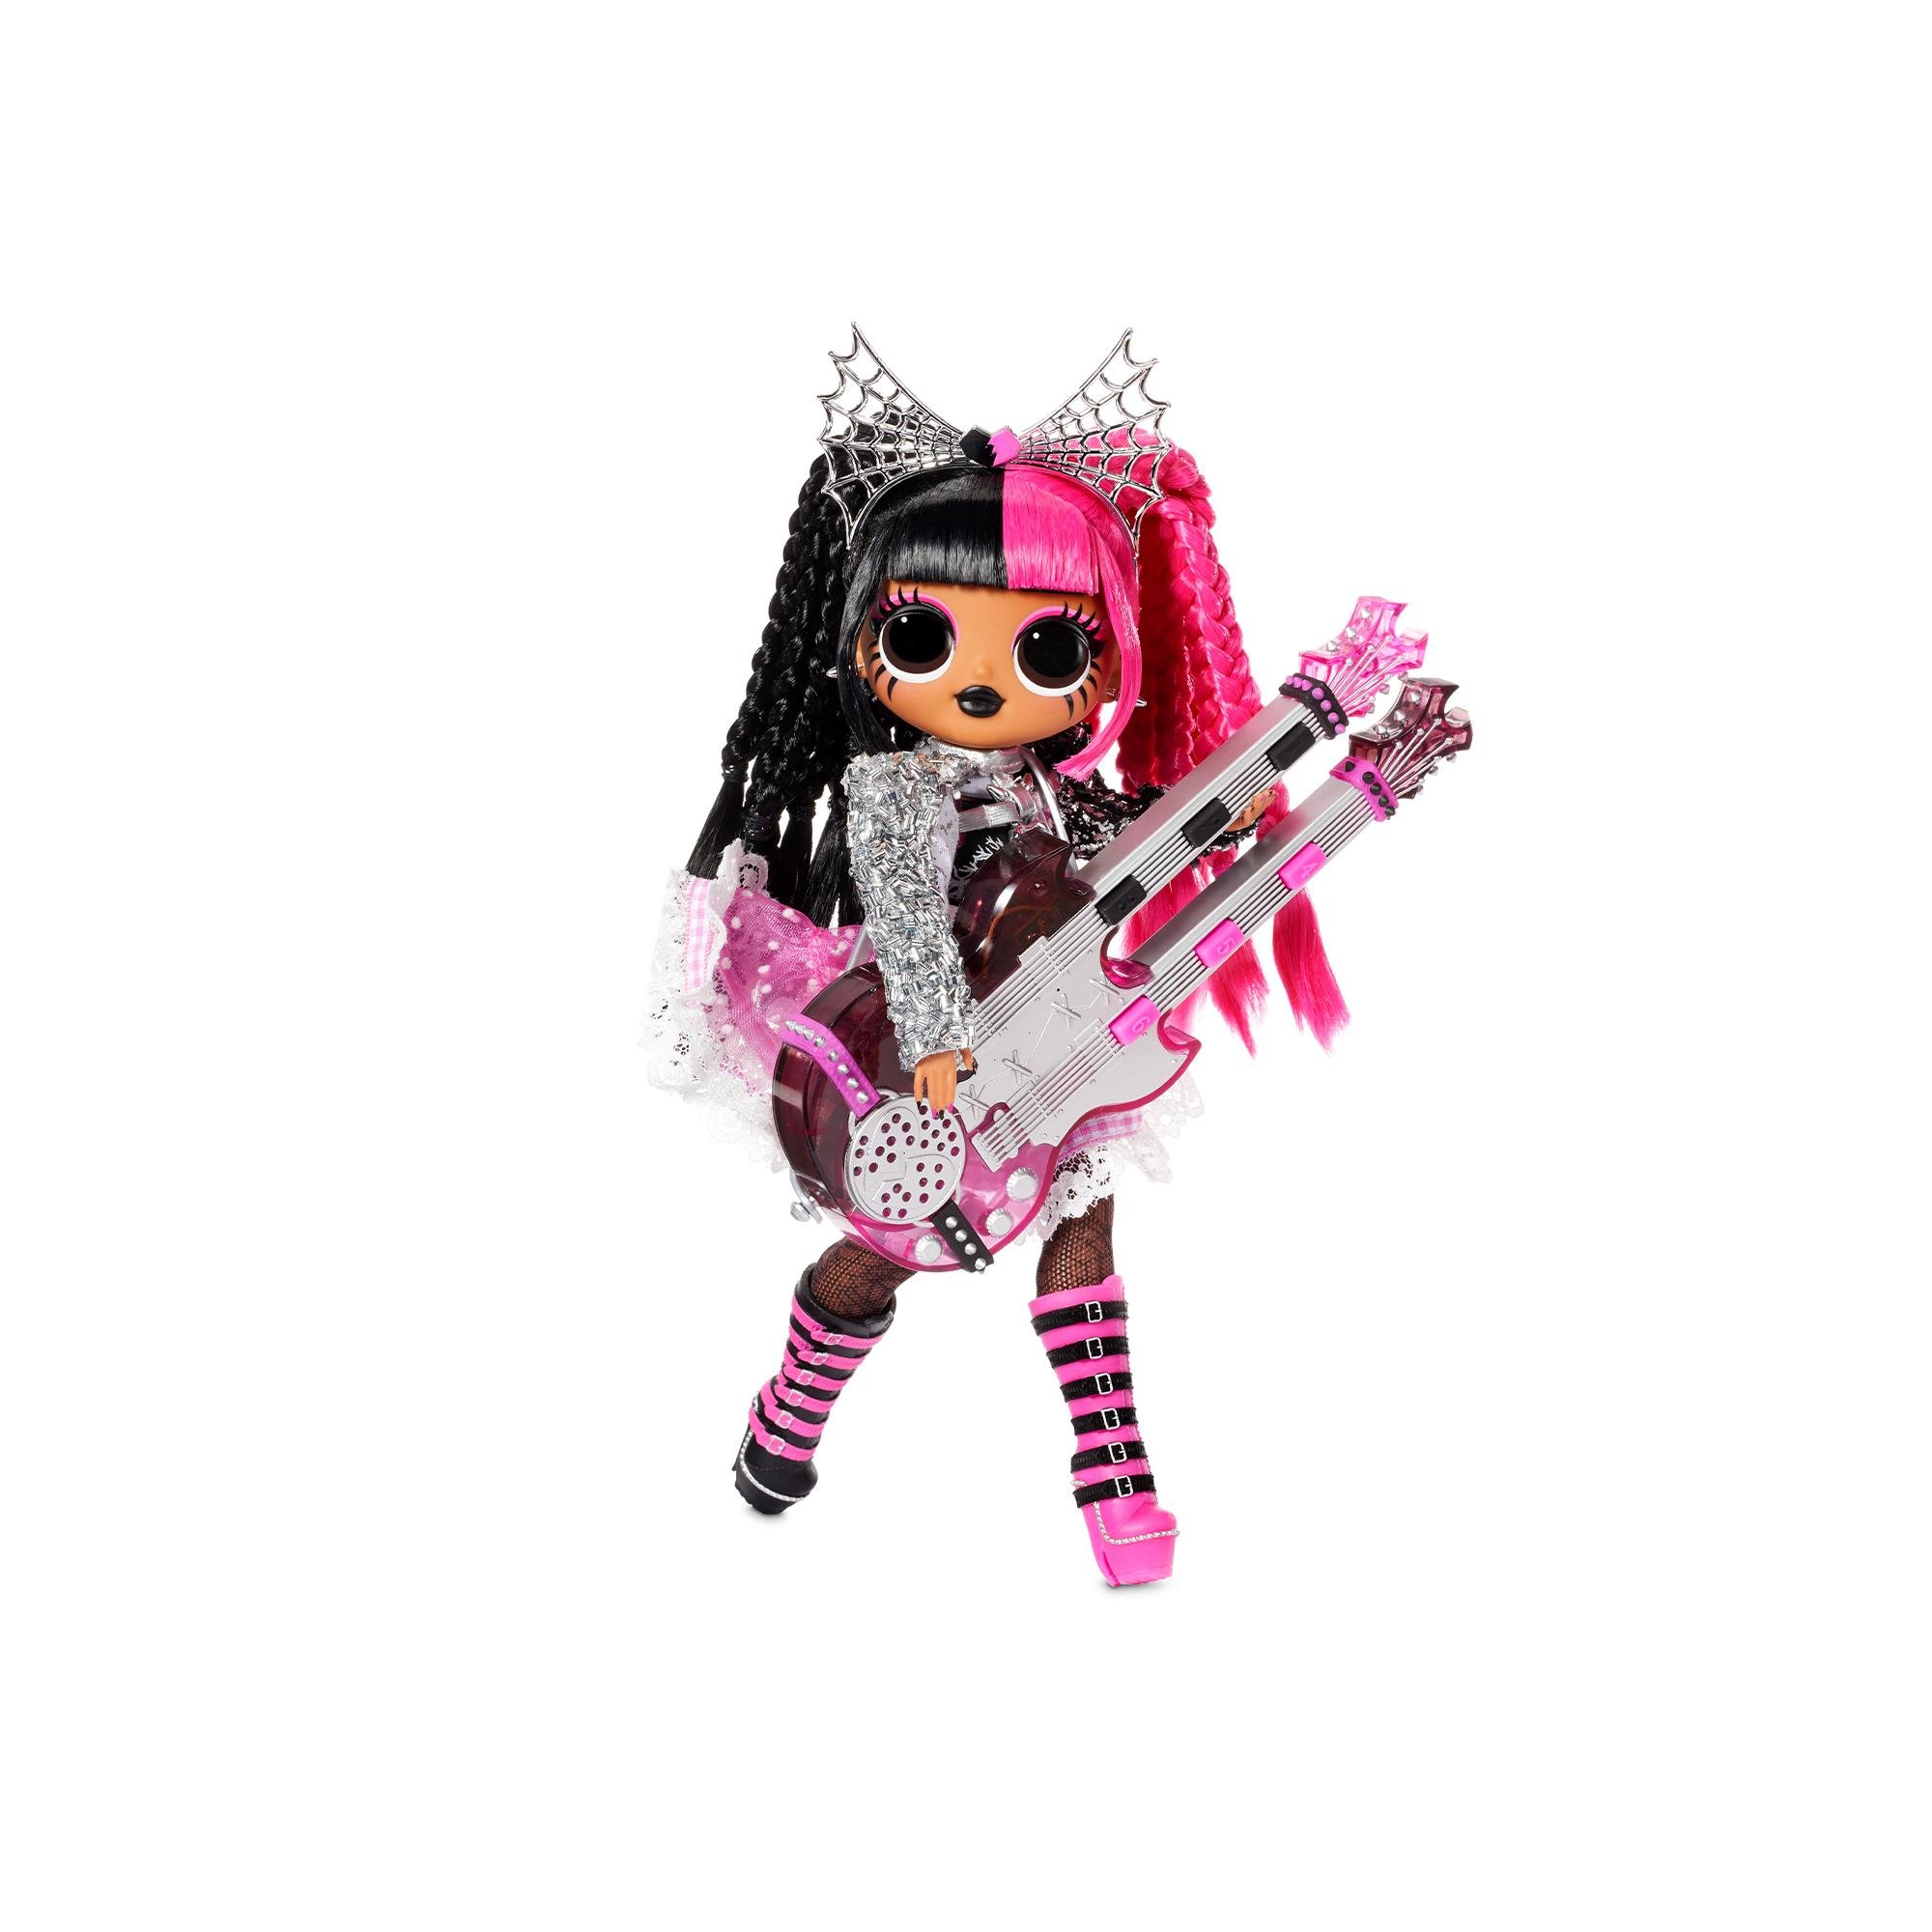 L.O.L. Surprise - OMG Remix Rock Doll - Metal Chick and Electric Guitar